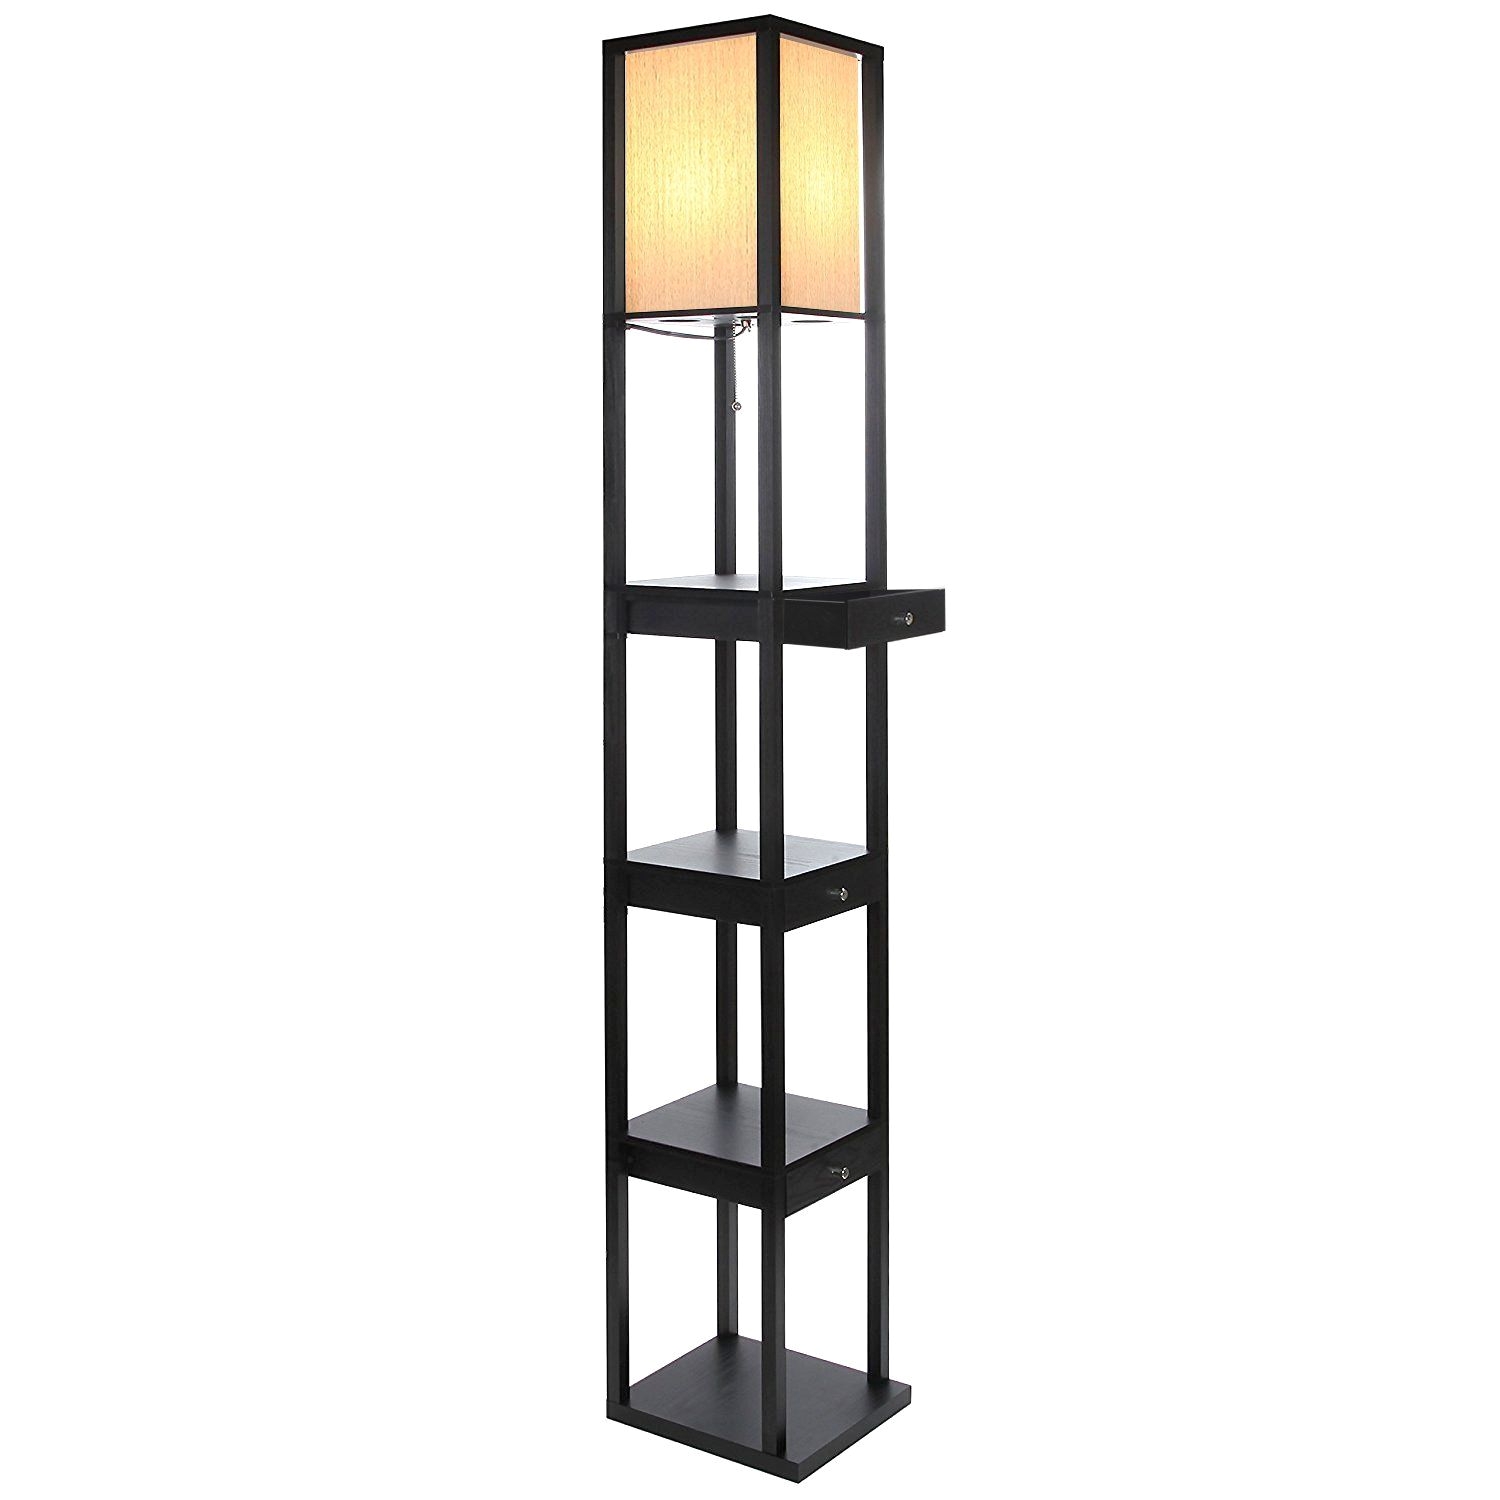 brightech maxwell led drawer edition shelf floor lamp modern asian style standing lamp with soft